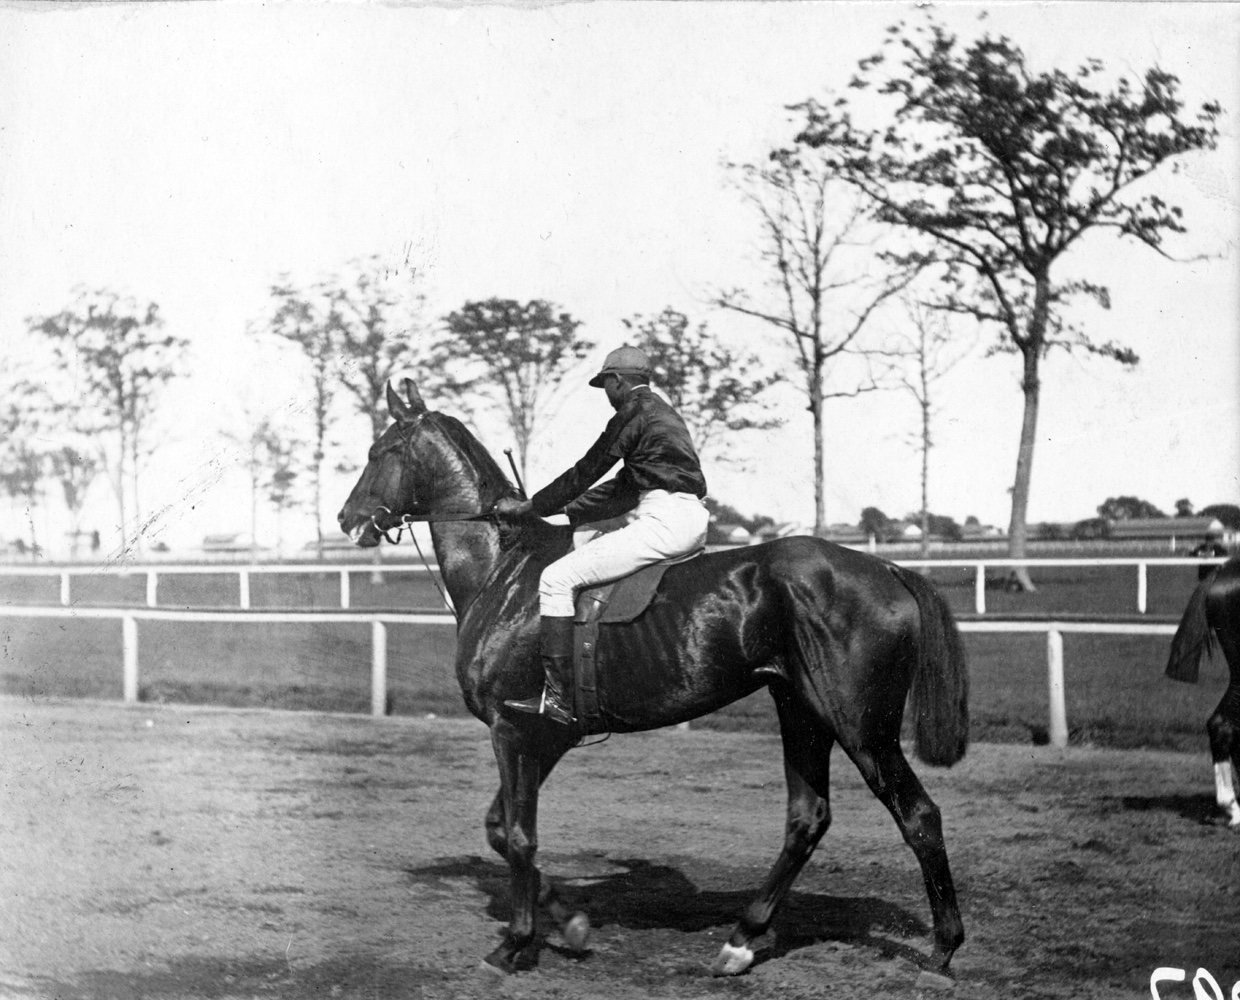 Shelby "Pike" Barnes and Montana, undated (Keeneland Library Hemment Collection)